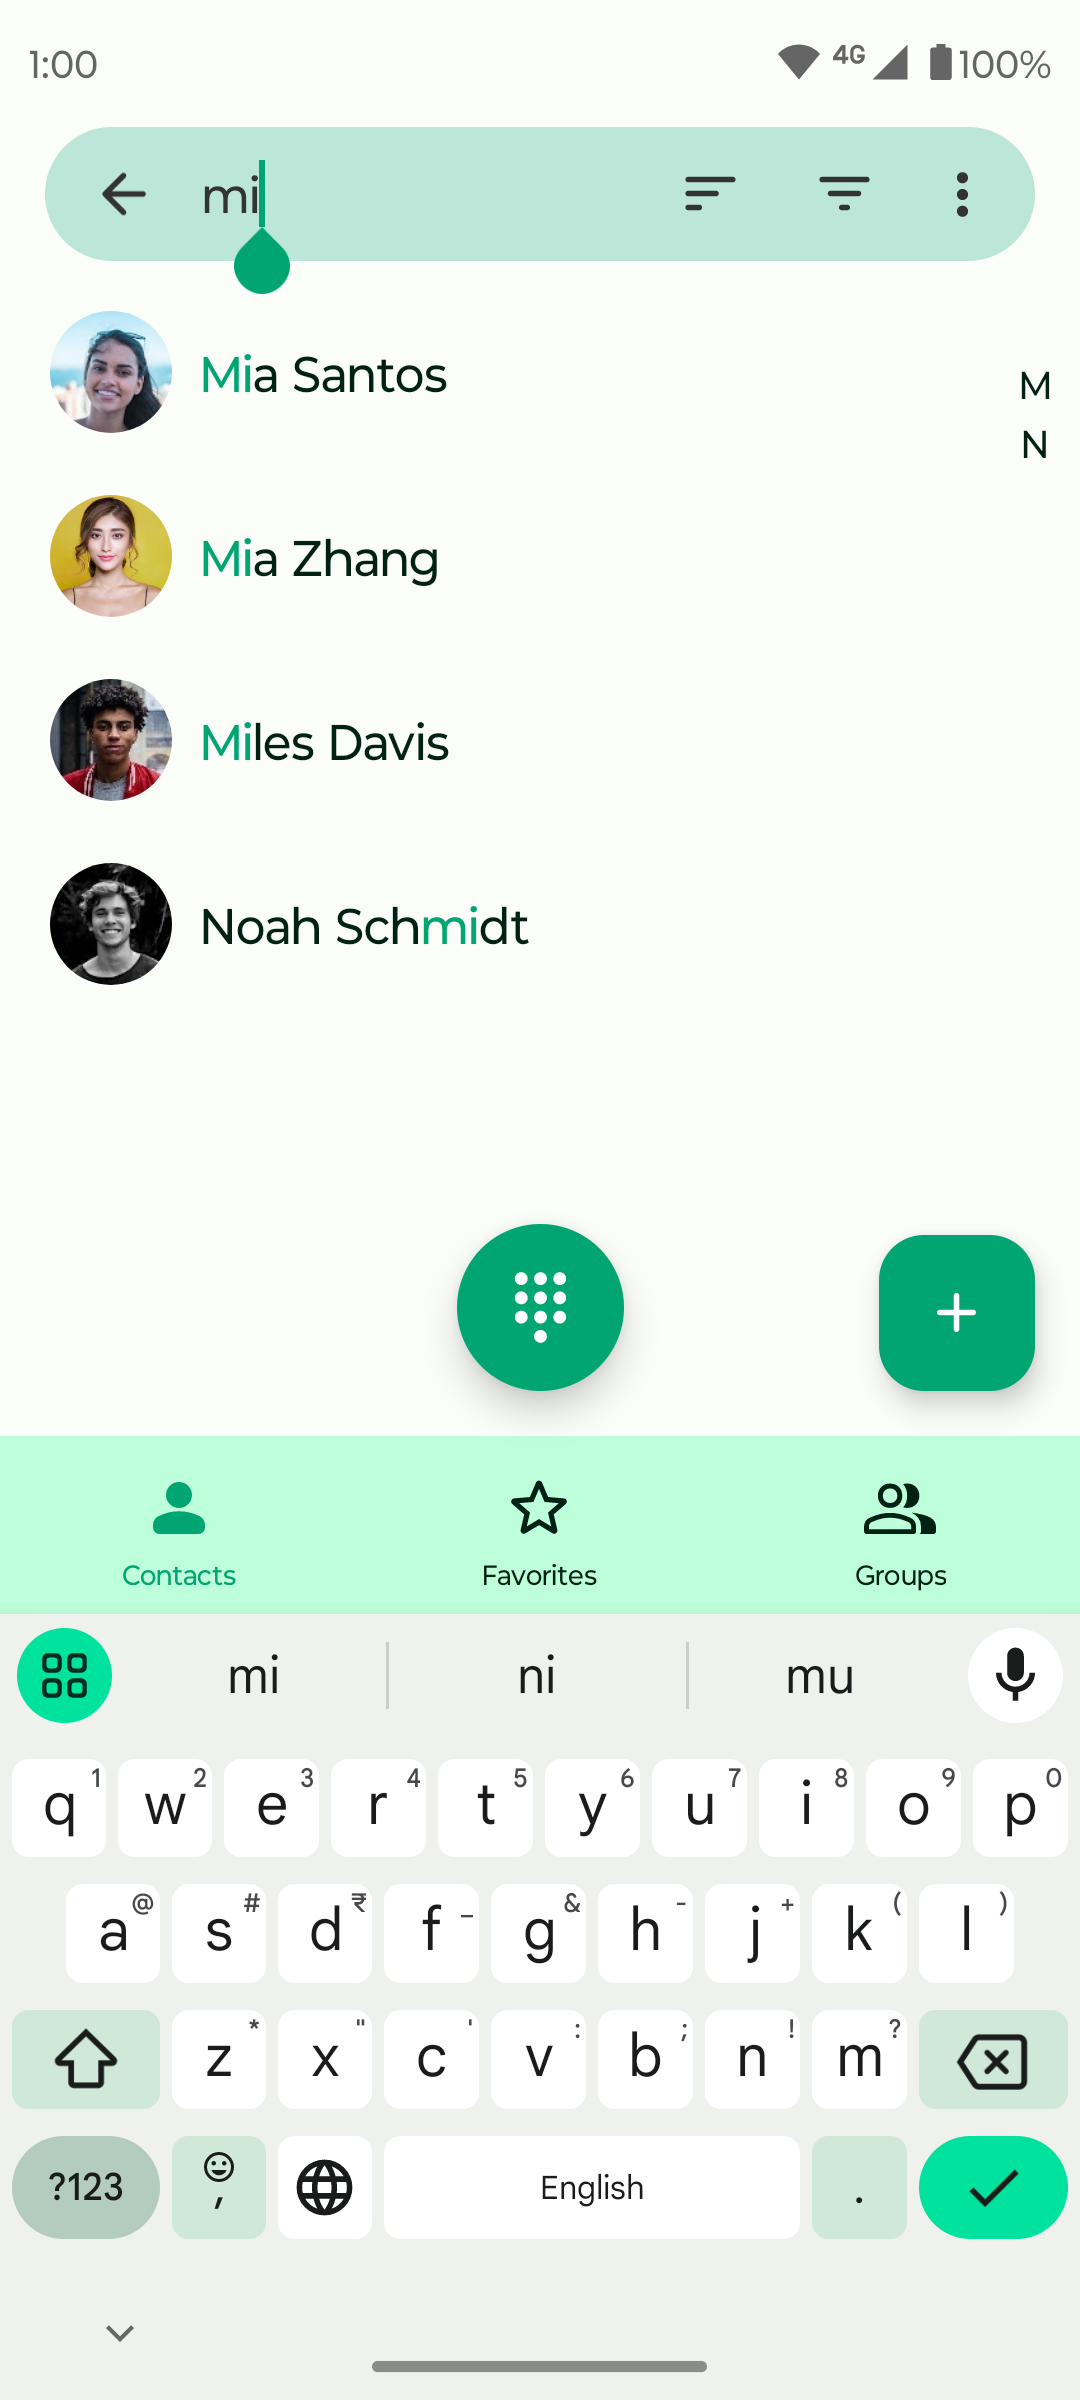 Screenshot of Fossify Contacts